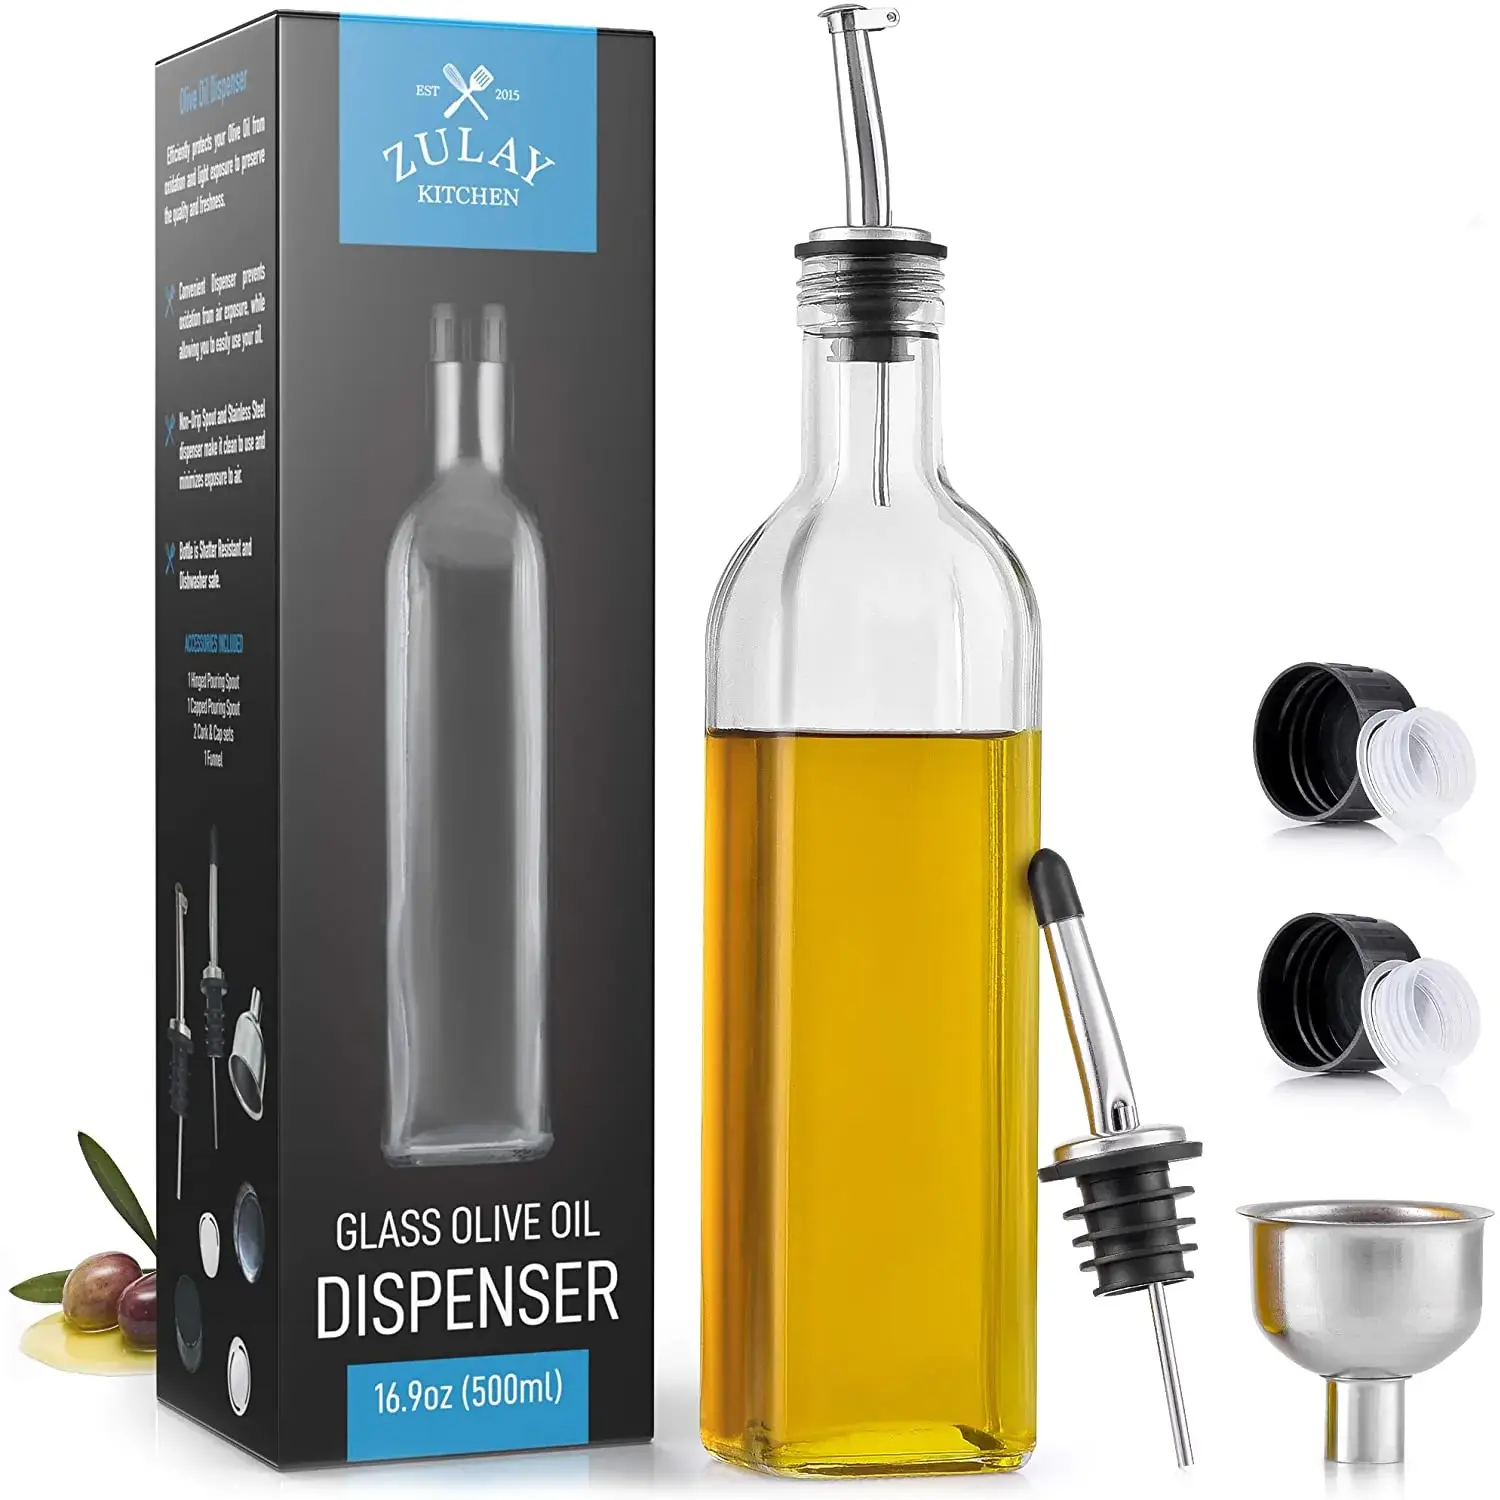 Olive Oil Dispenser Bottle With Accessories